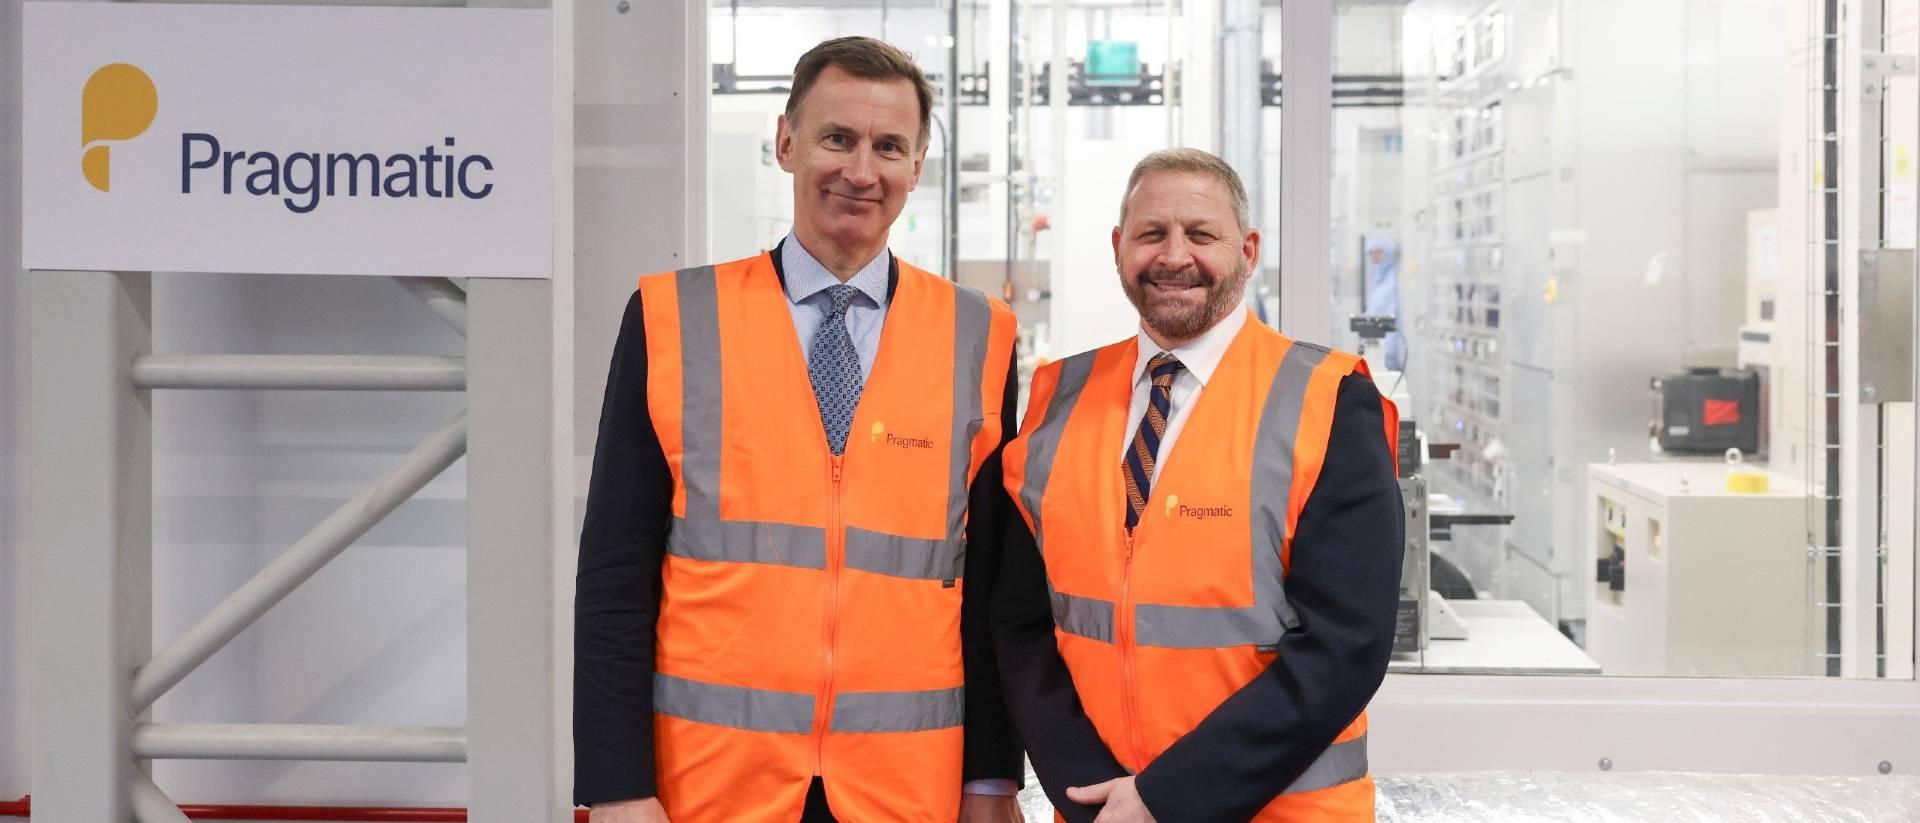 Pragmatic welcomes Chancellor of the Exchequer, Jeremy Hunt, to Pragmatic Park